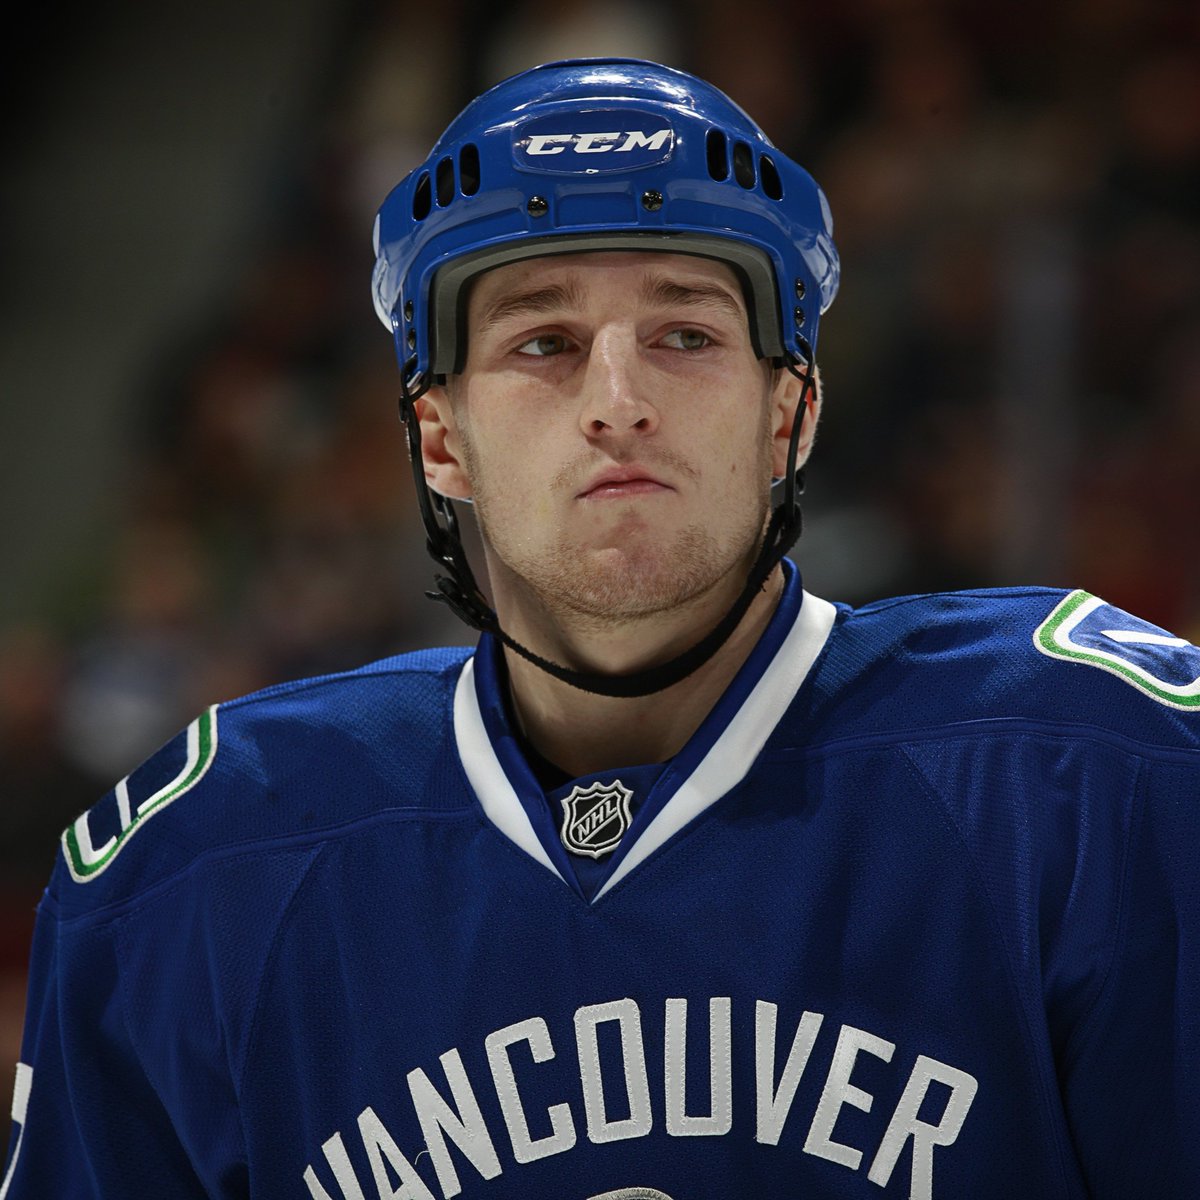 Today would have been Rick Rypien's 40th birthday. We continue to honour Rick’s legacy through #HockeyTalks and breaking the stigma surrounding mental health. It's okay not to be okay and resources are available at: community.canucks.com/hockey-talks/ We miss you, Rick. Happy Birthday 💙